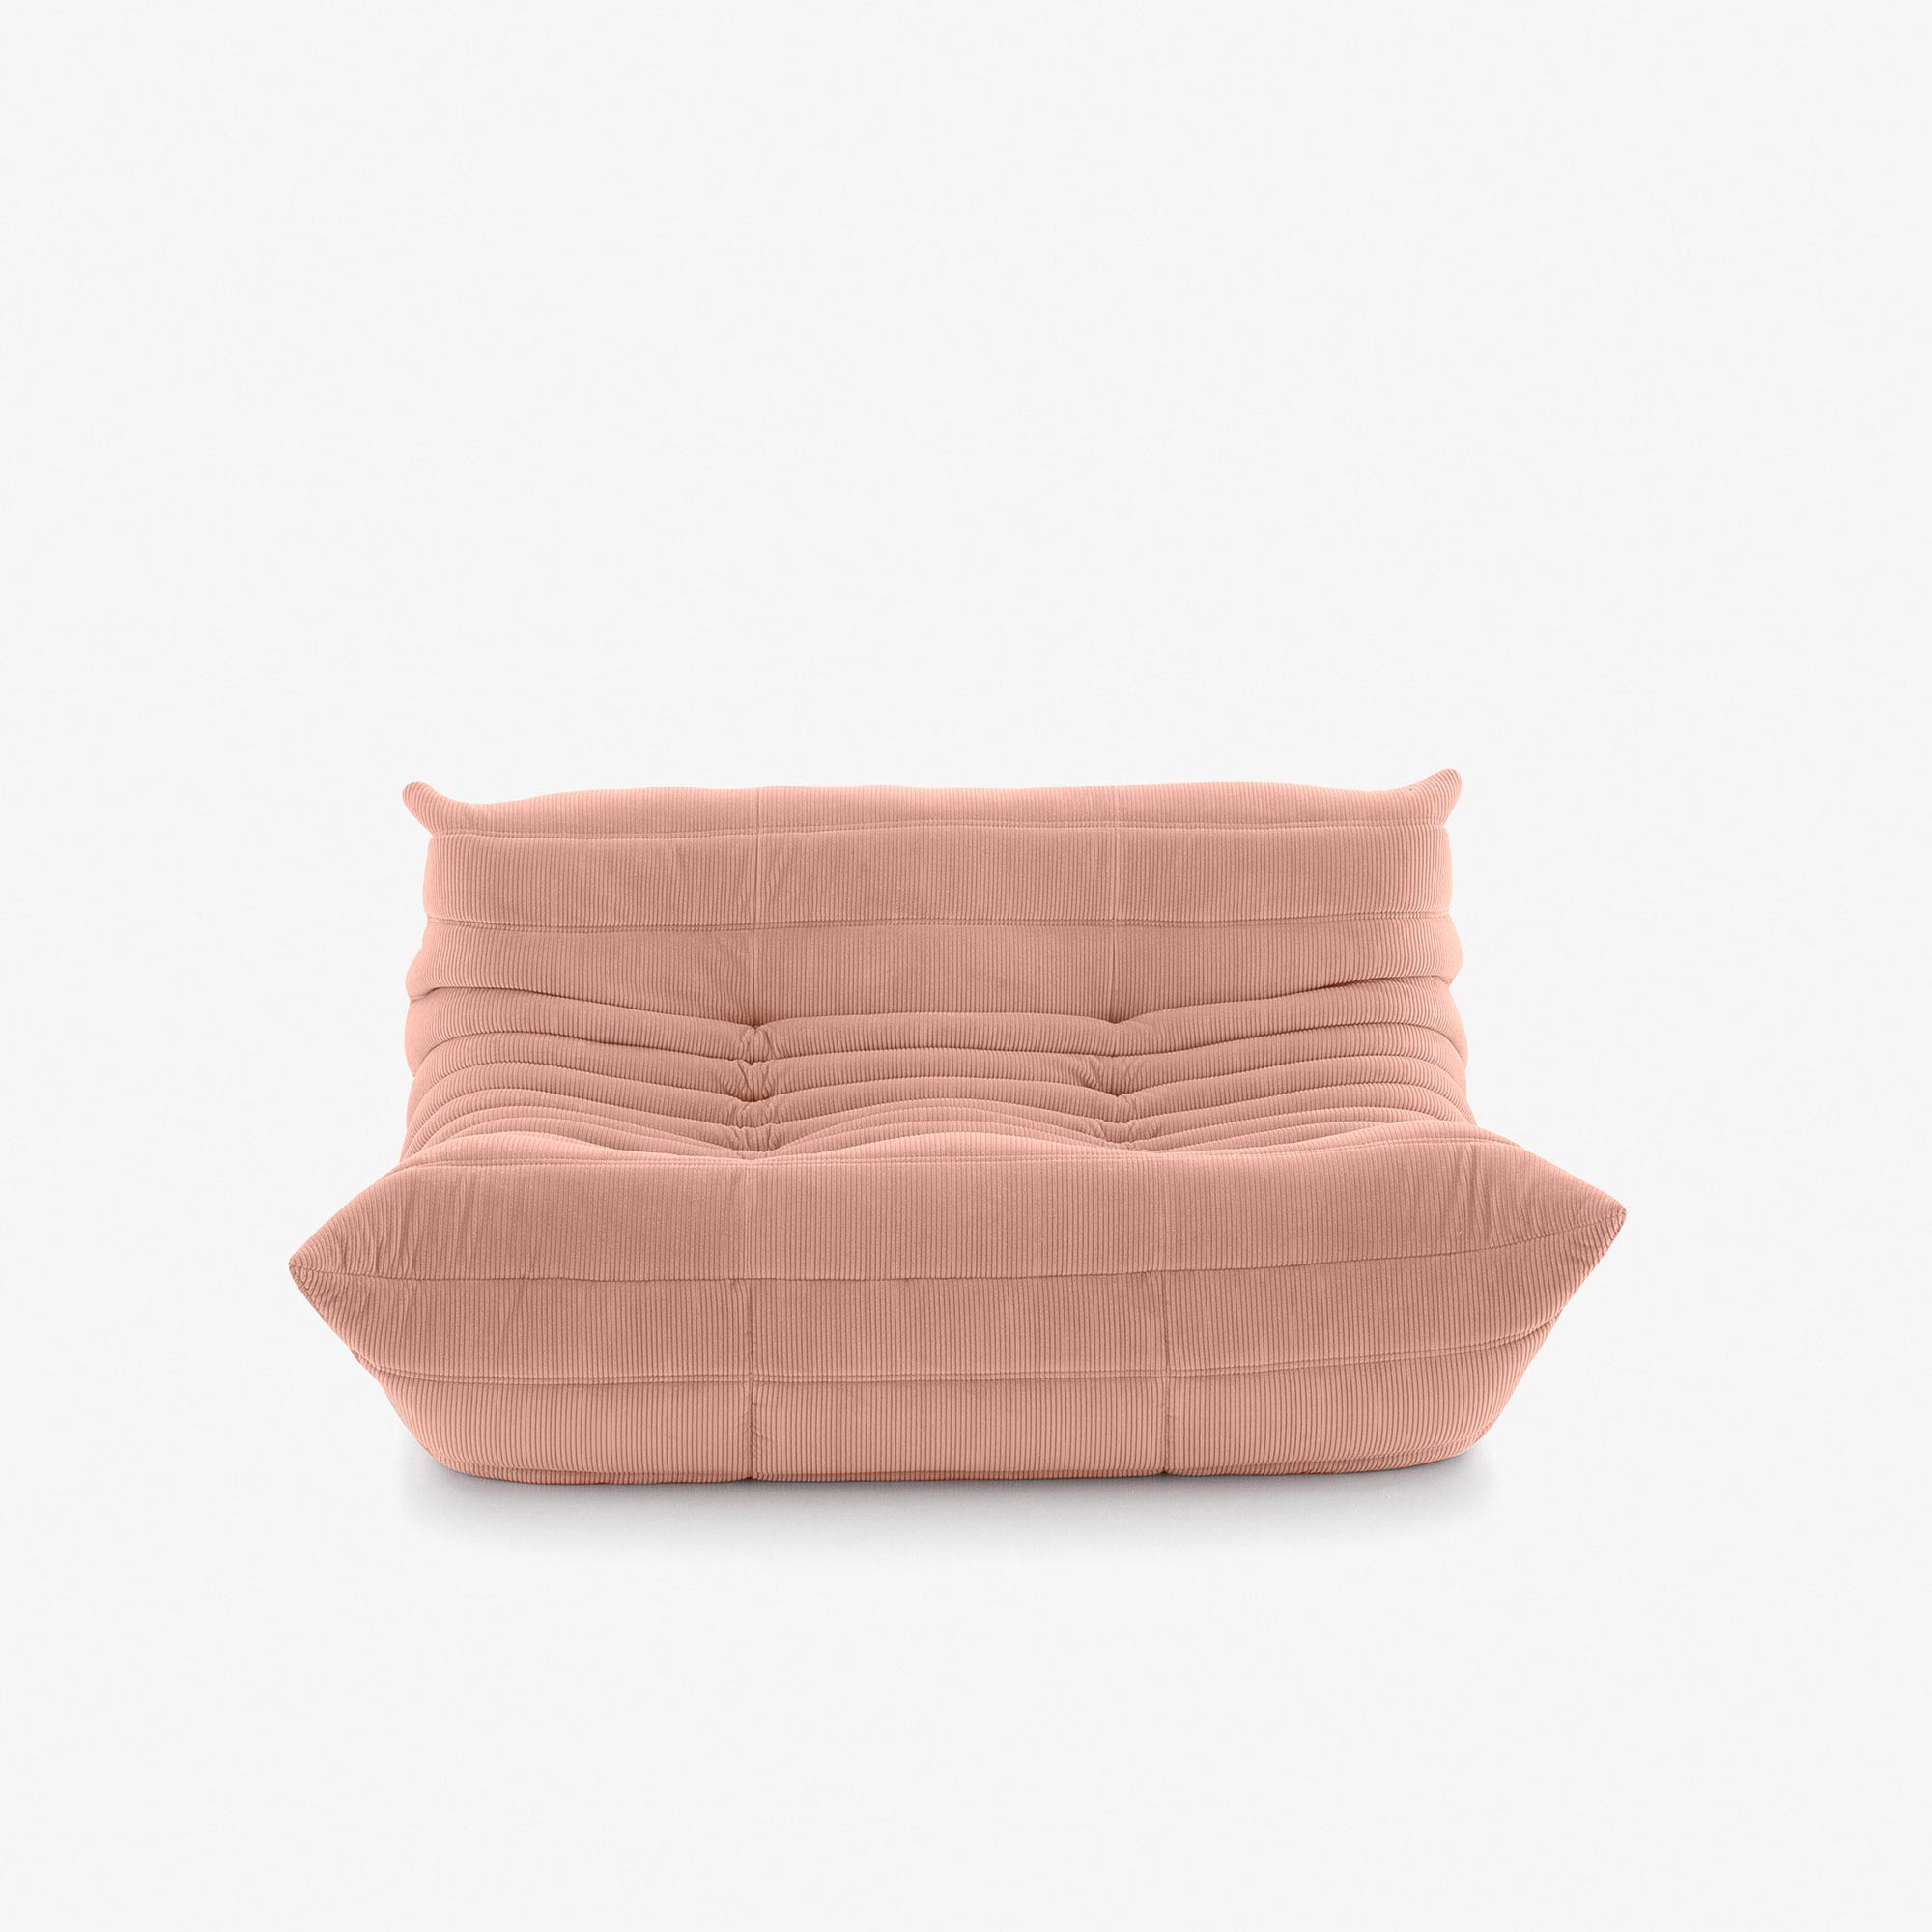 Ligne Roset by Inga Sempé Moel Red and Grey Quilted Loveseat Sofa